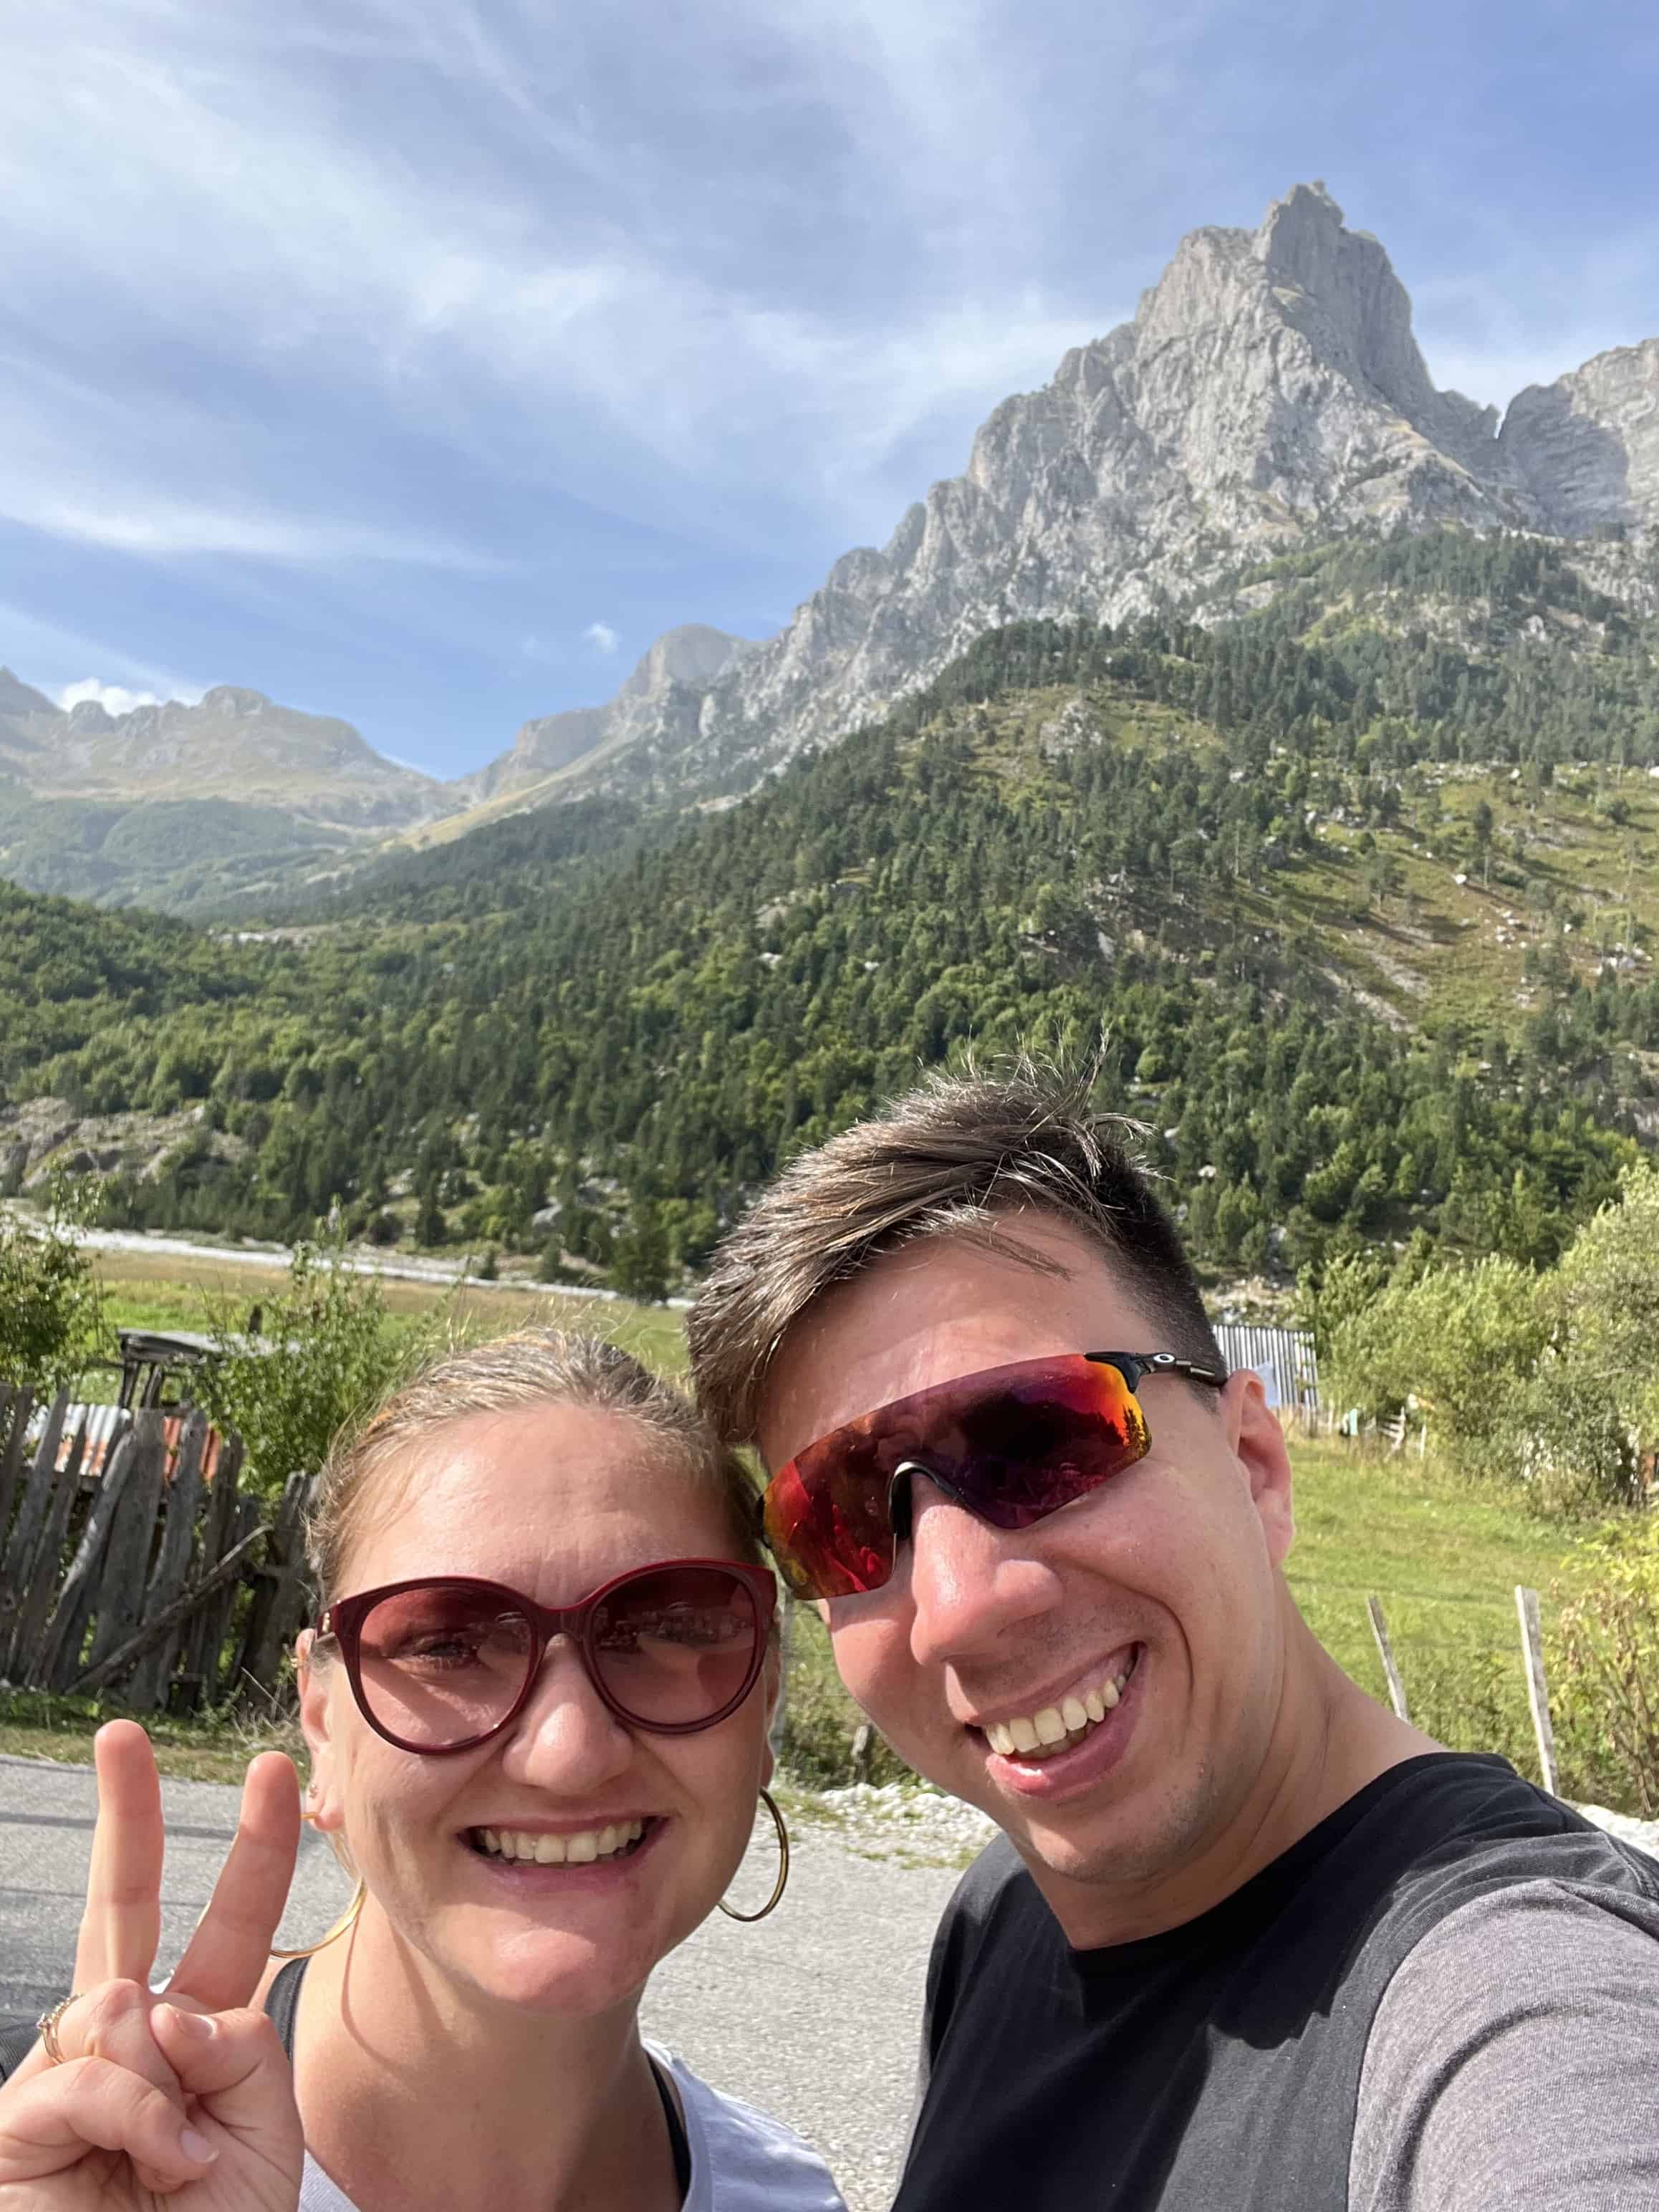 First impressions of Valbona